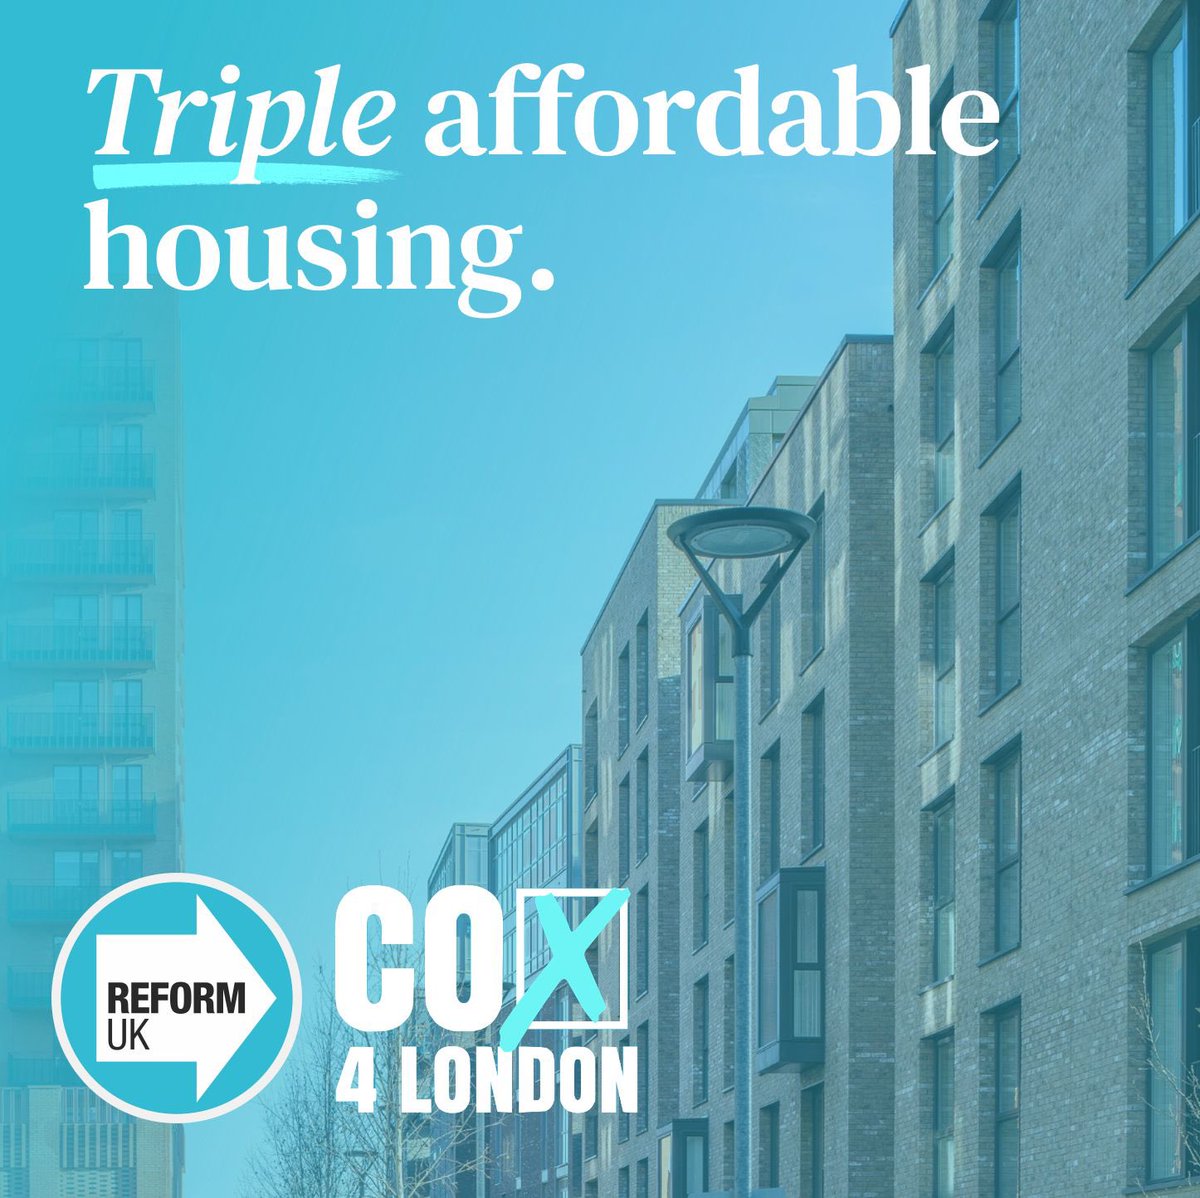 ➡️ London needs more affordable housing.  I will confront this issue head-on and help those struggling to find affordable housing.  Tomorrow, vote Howard Cox and Reform UK— Your chance to save London.